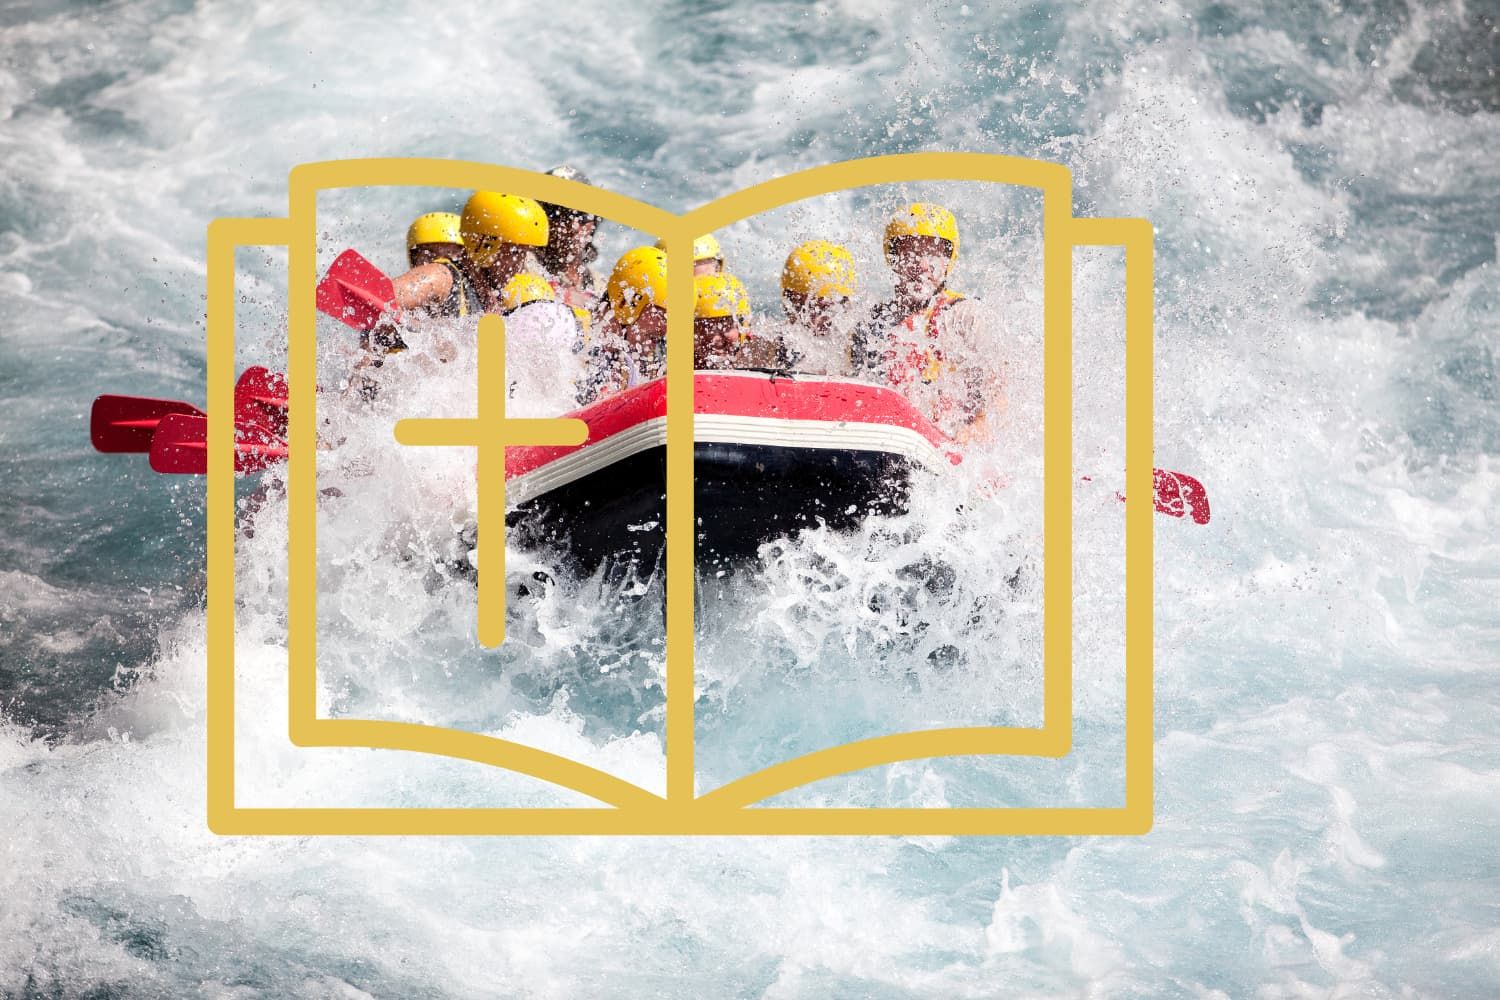 A group of teenagers who are wild water rafting through an open Bible